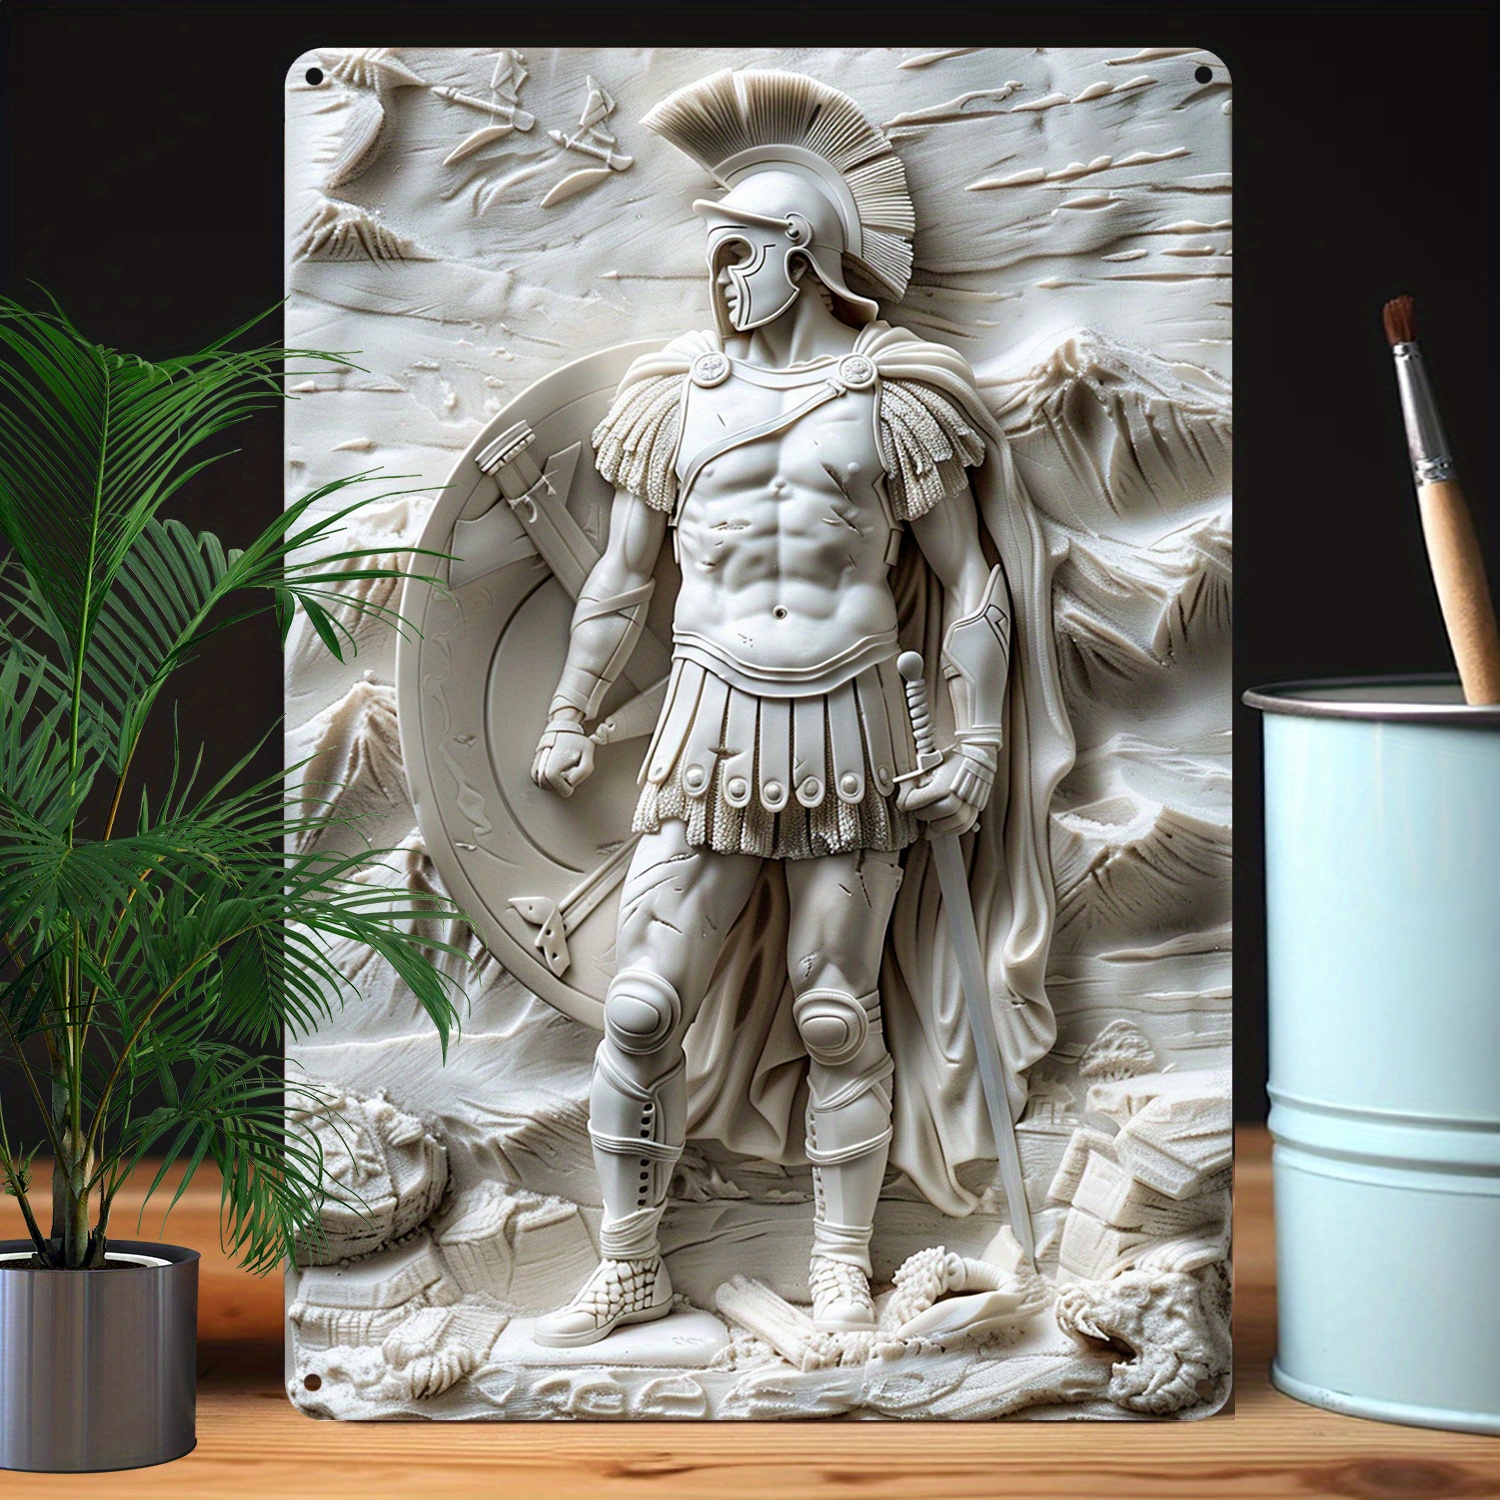 

1pc Aluminum Wall Art, 8x12 Inch 3d Relief Warrior Scene, Moisture Resistant Metal Decor For Home, Gym, Bathroom, And Garden - Funny Vintage-inspired Tin Sign For Birthday Gift And Themed Decor A3227